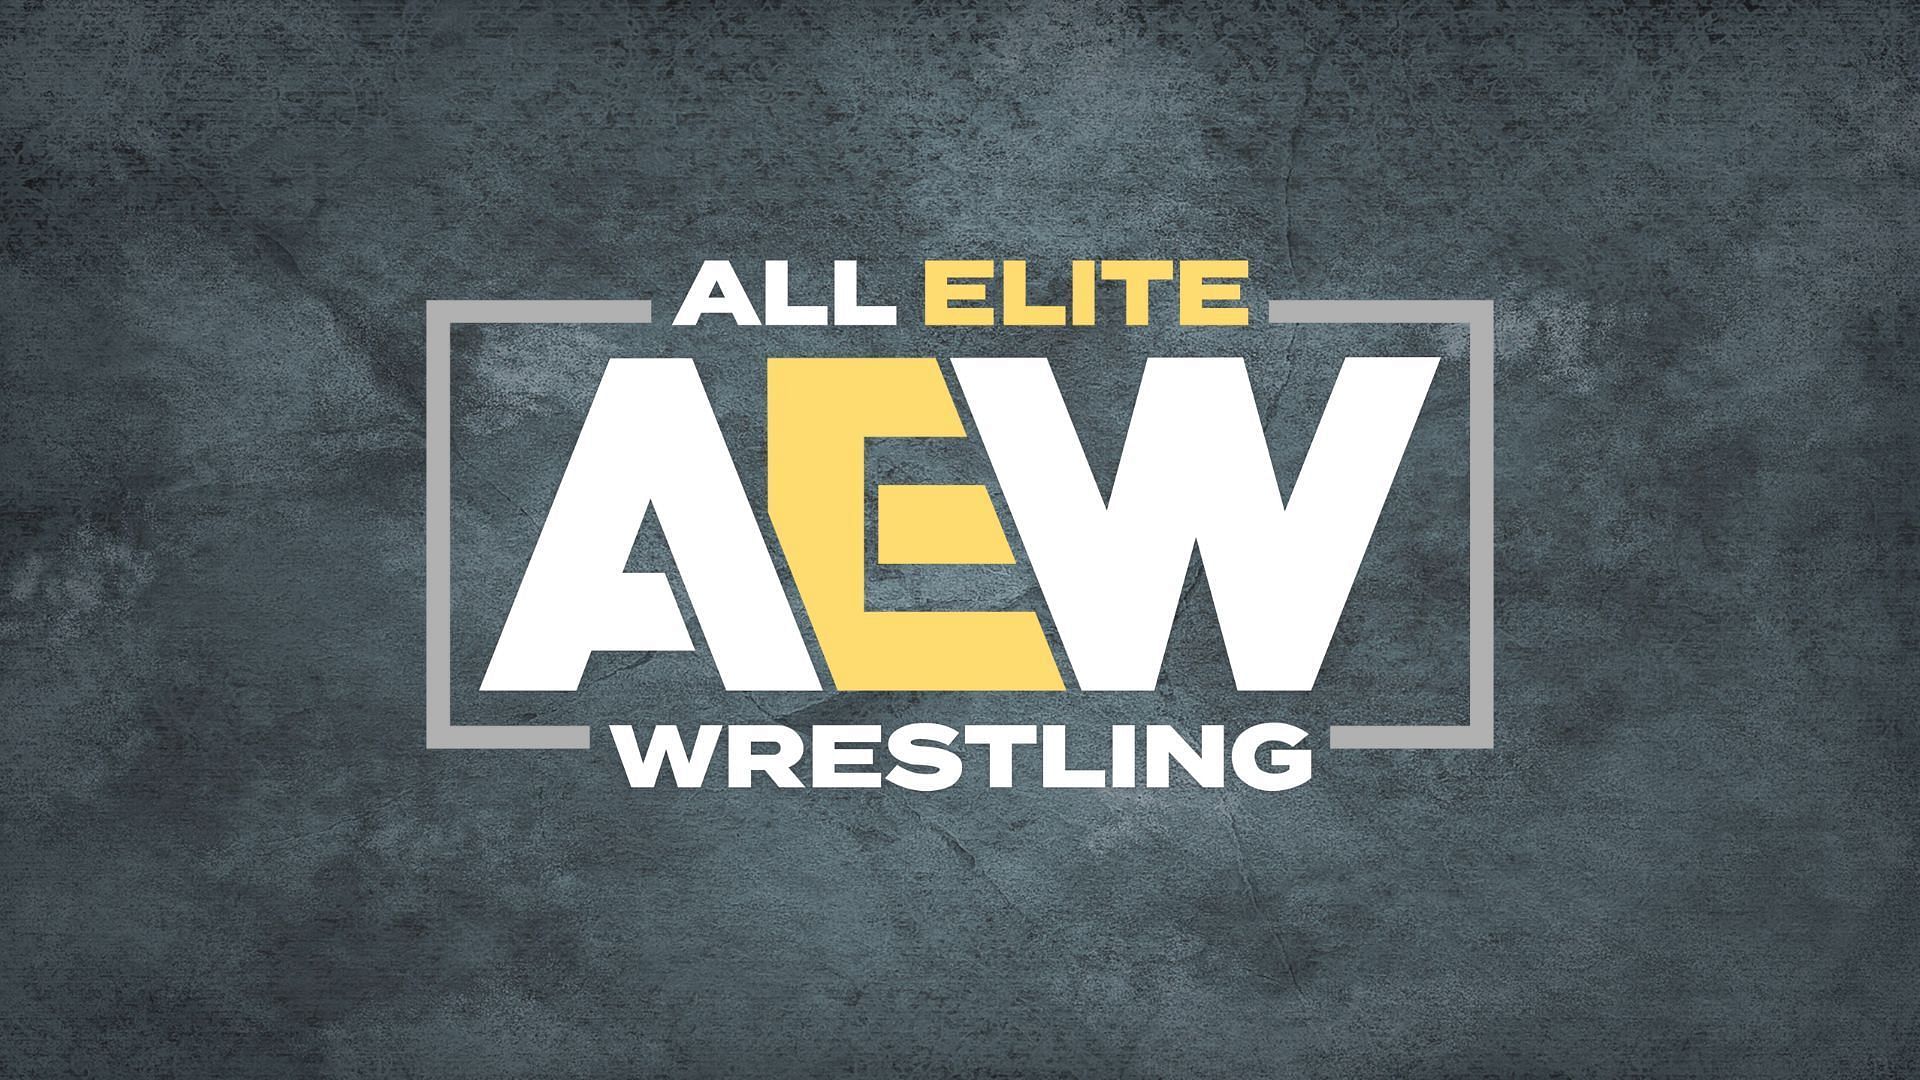 AEW Dynamite:Title Tuesday went head to head with WWE NXT on October 10